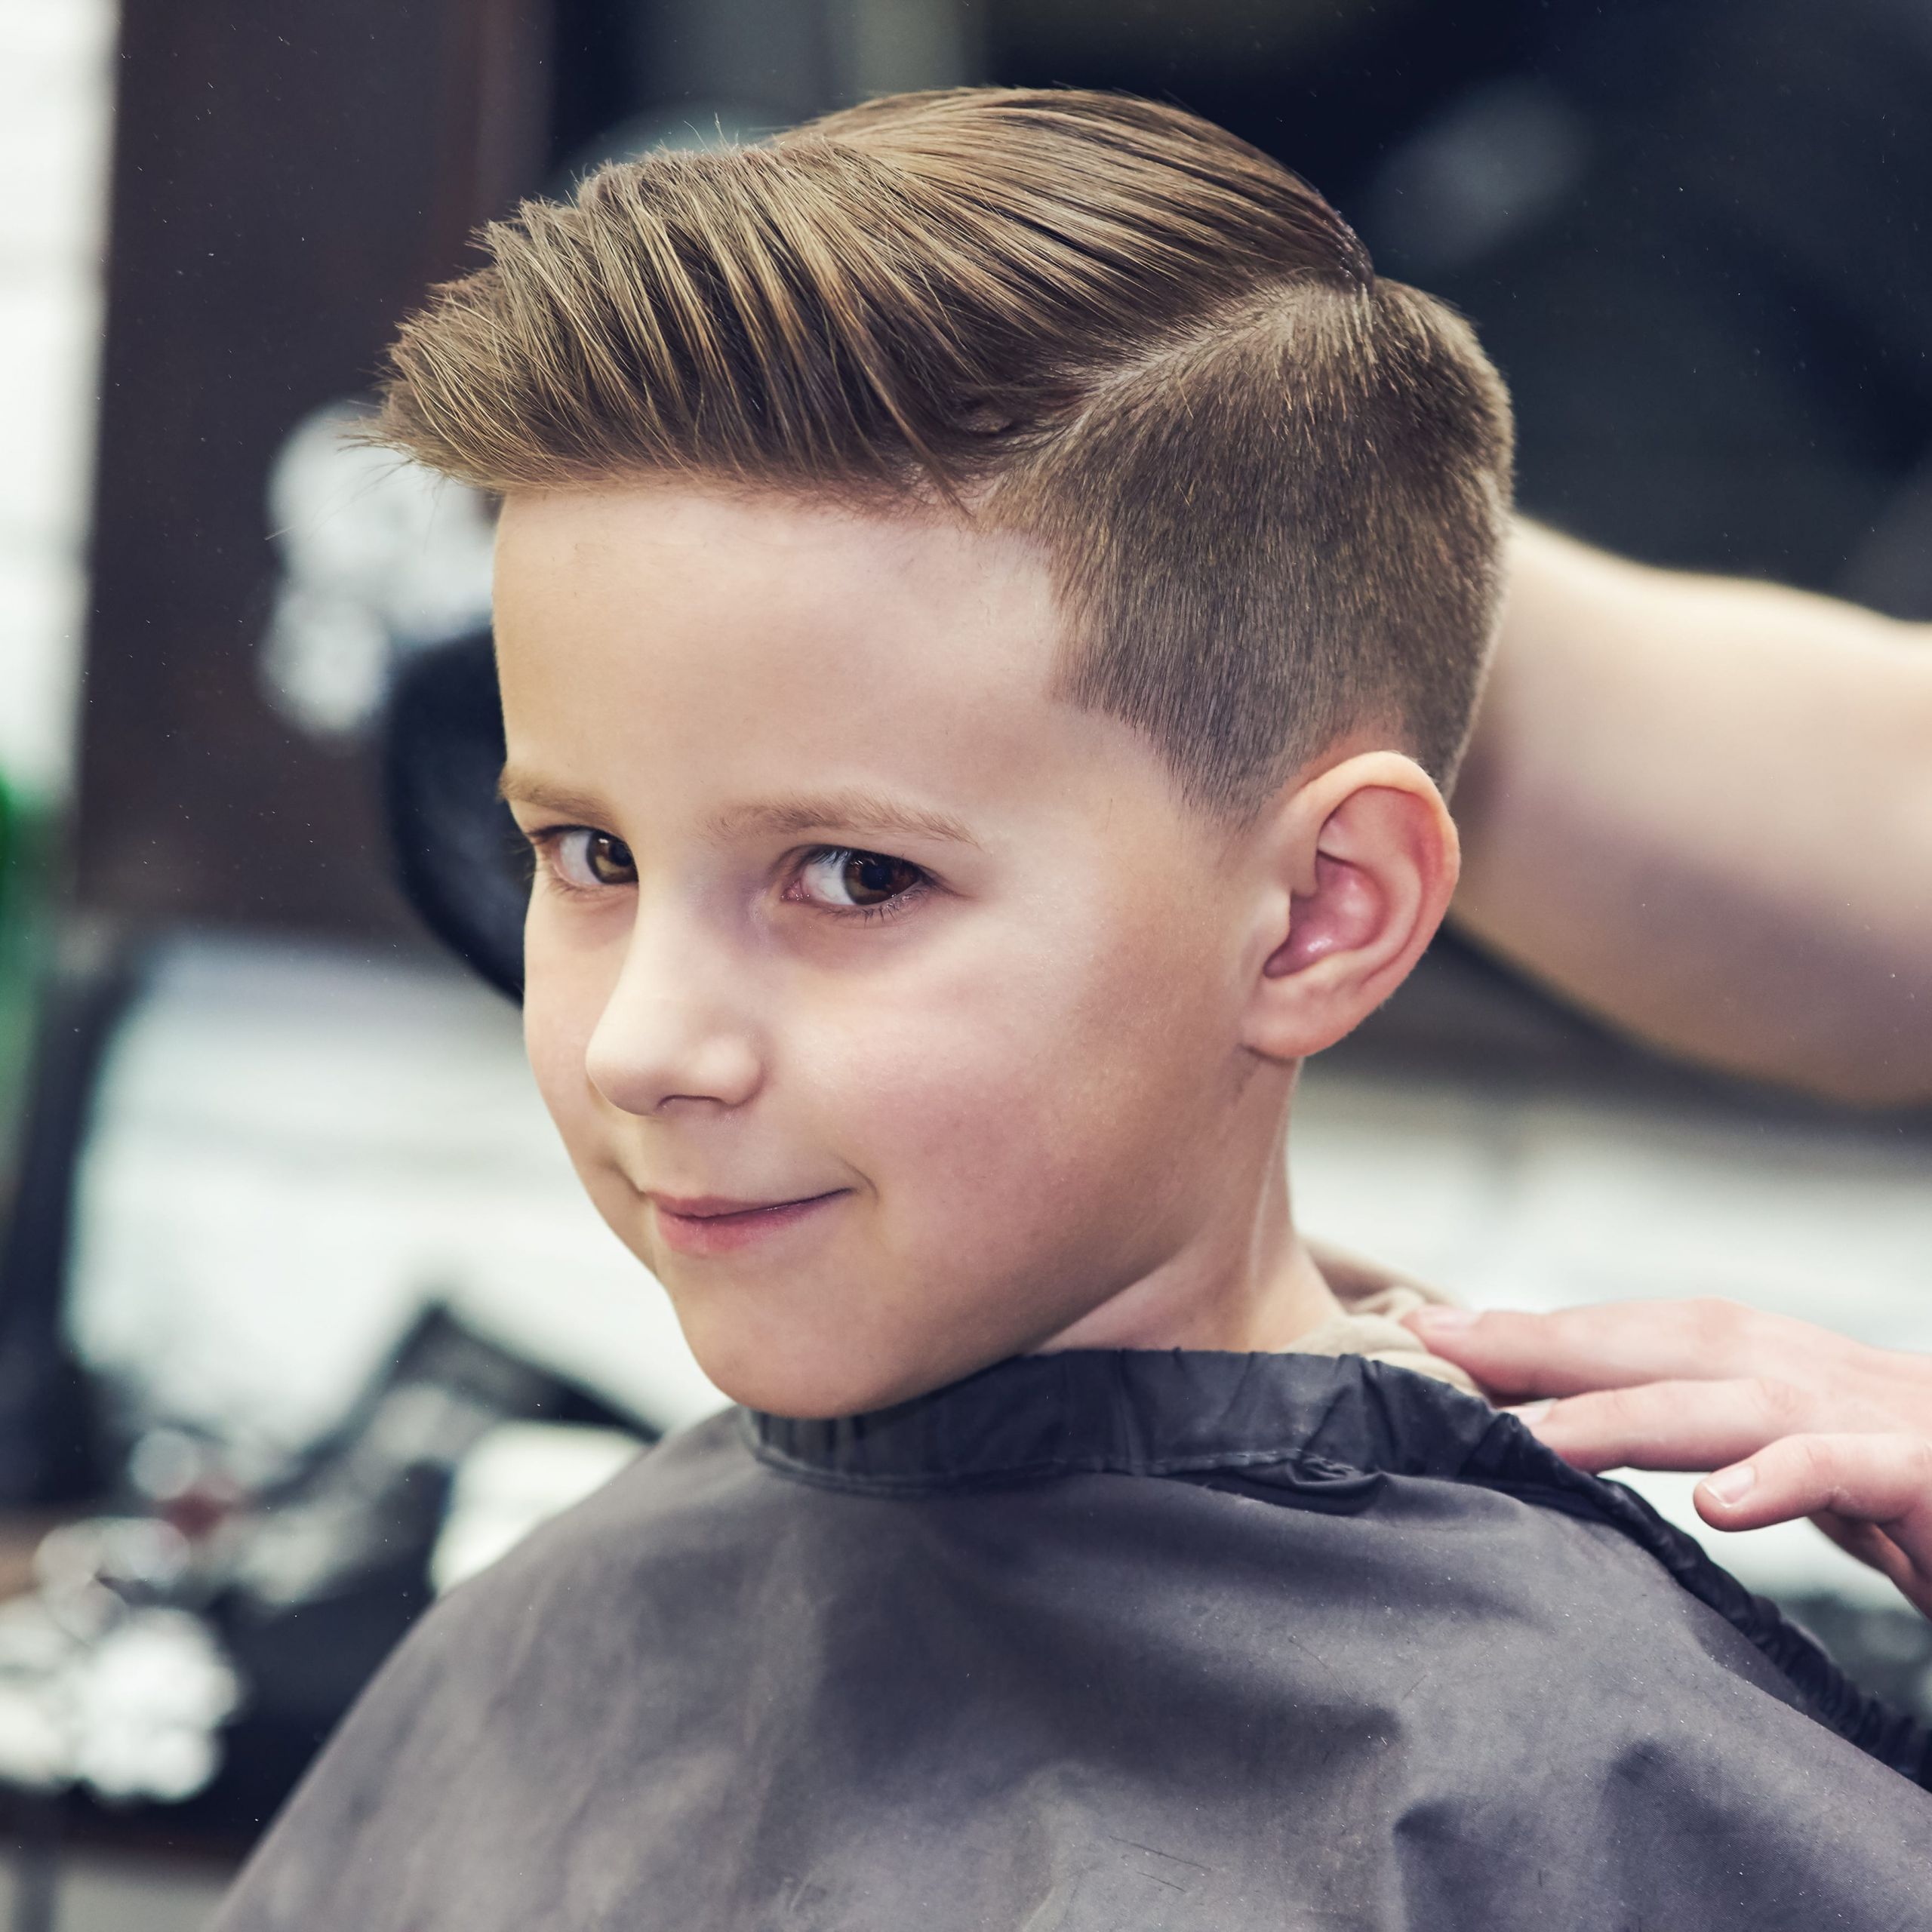 Boy Cuts Hairstyles
 Top Coolest Quiff Haircut And Hairstyles For Boys In 2019